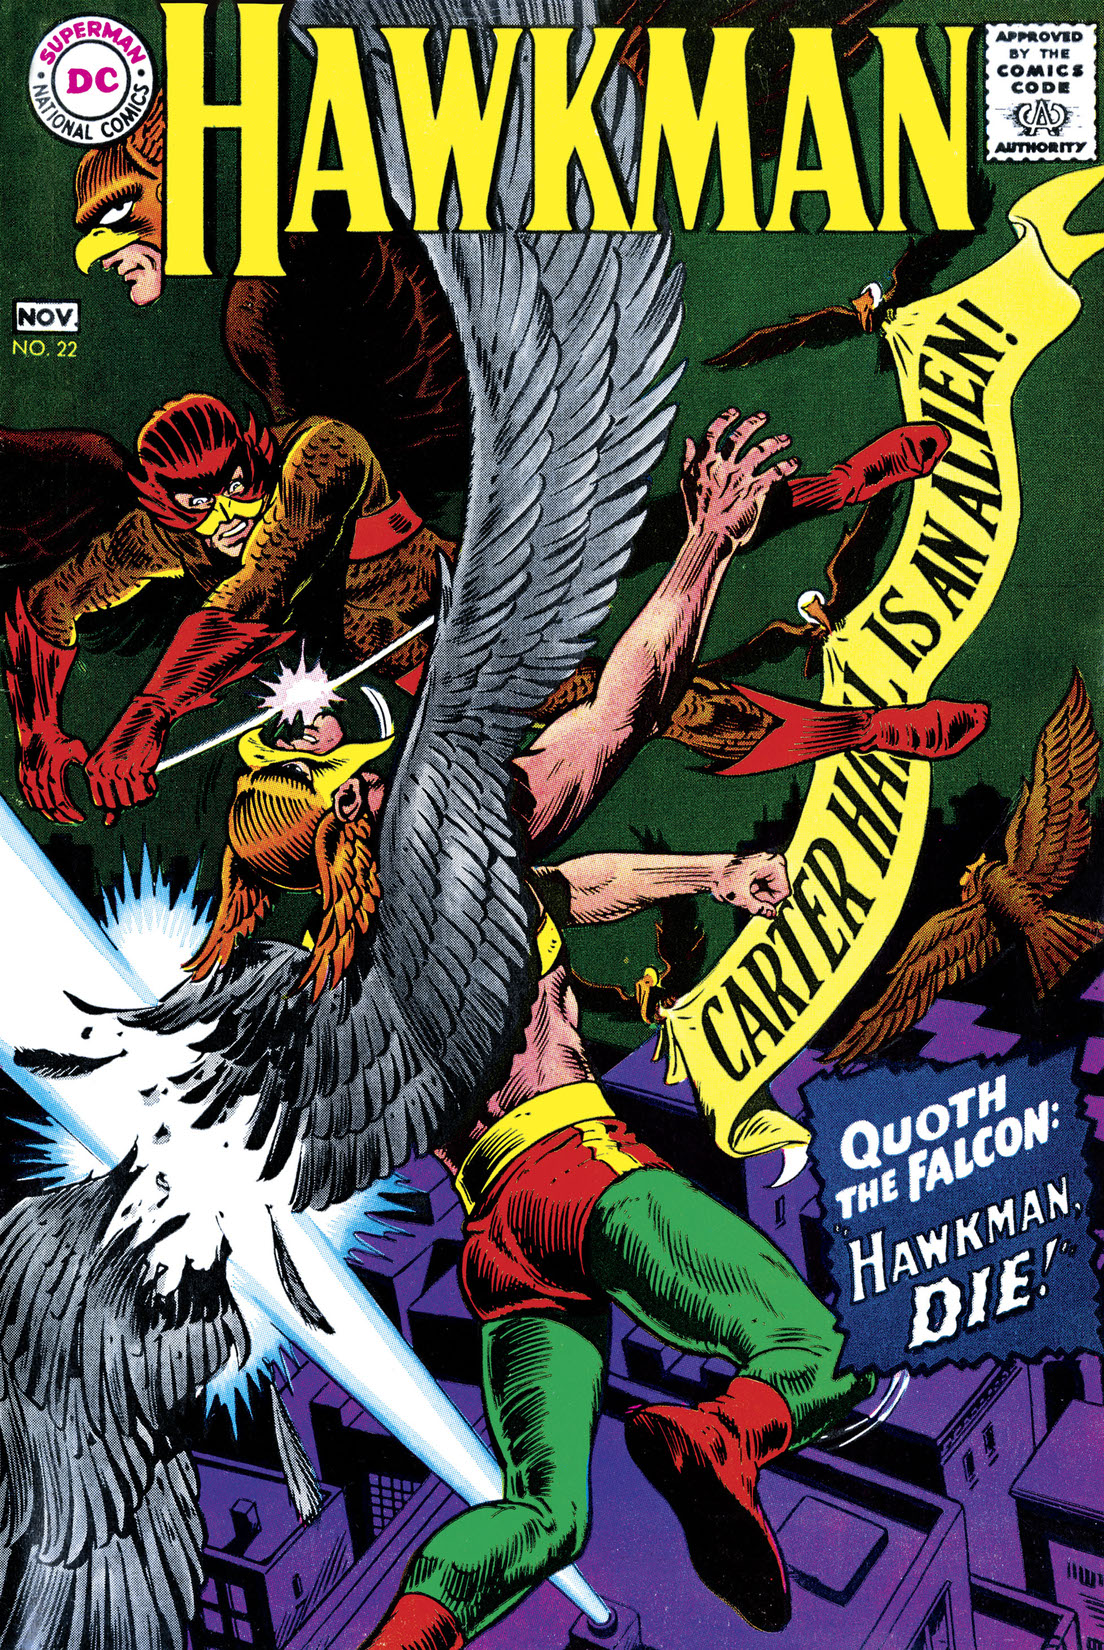 Hawkman (1964-) #22 preview images